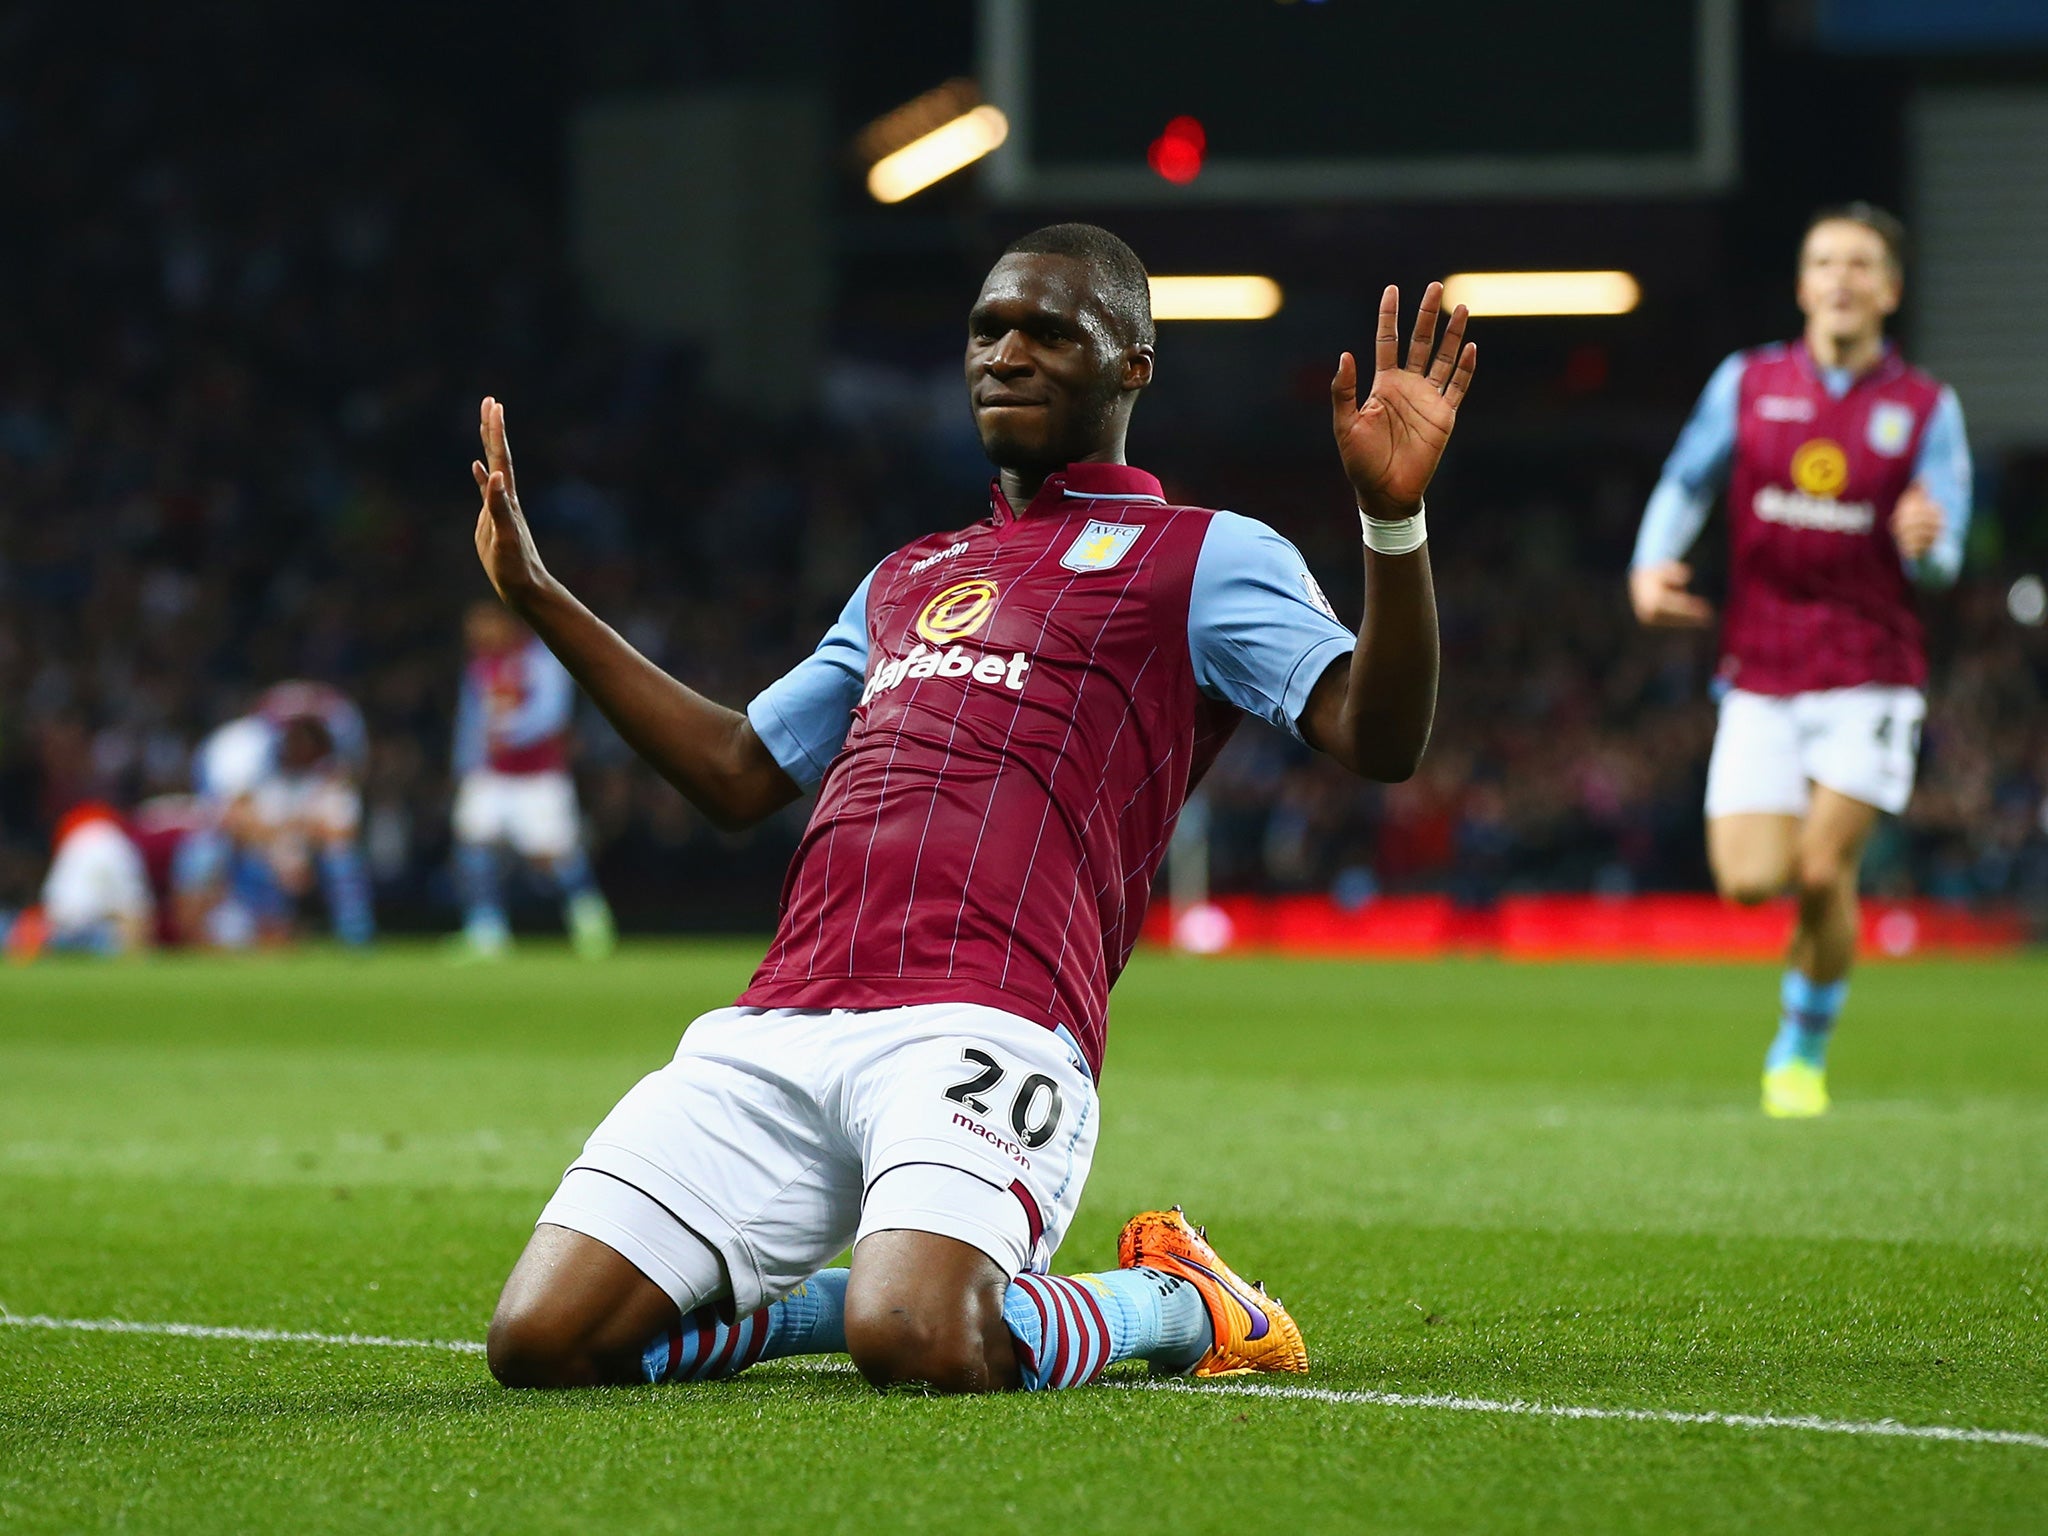 Christian Benteke has a buy-out clause of £32.5 million